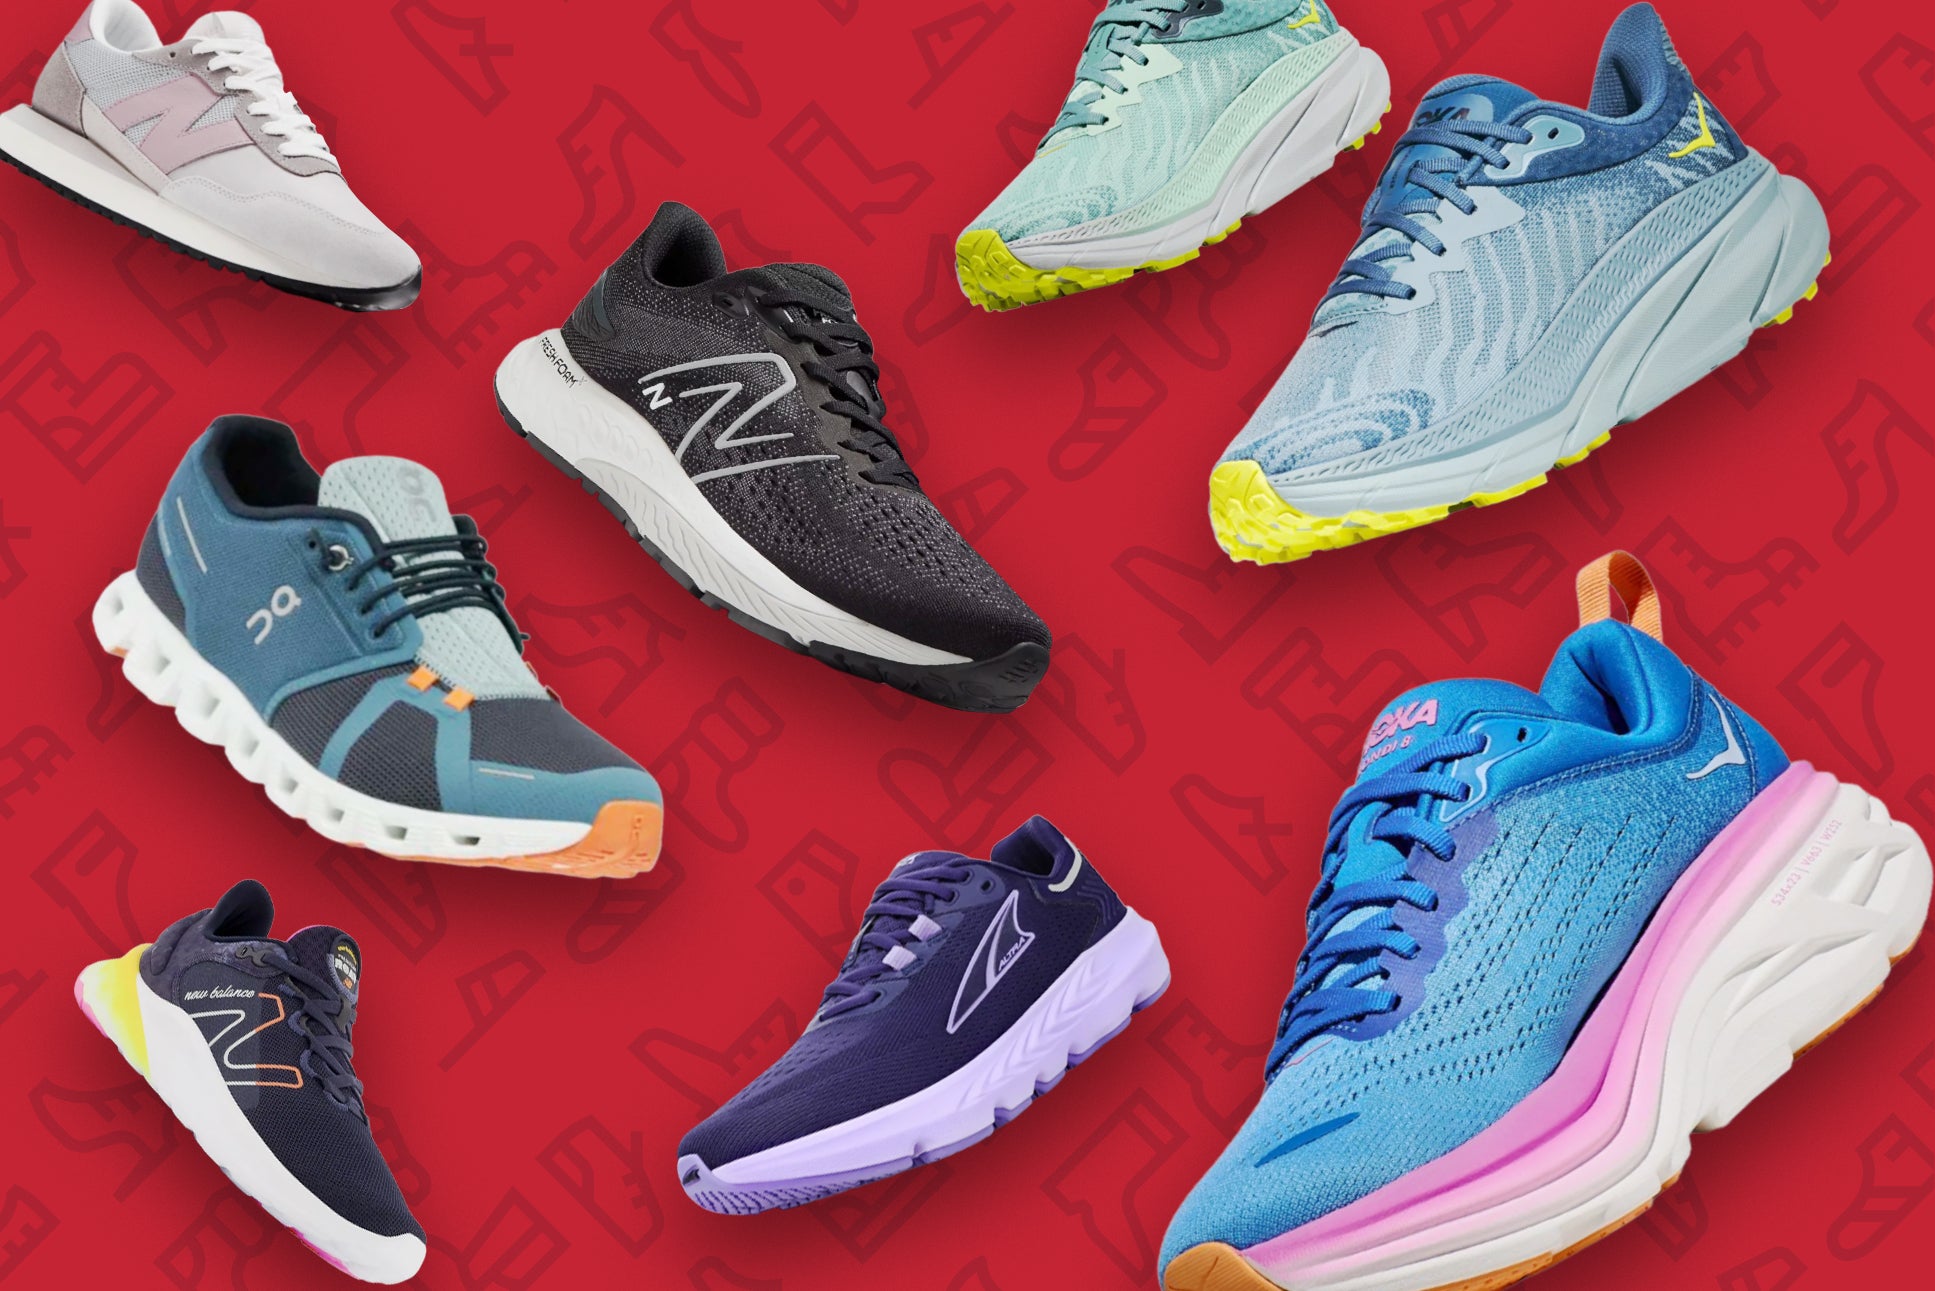 Choosing the Right Athletic Shoes